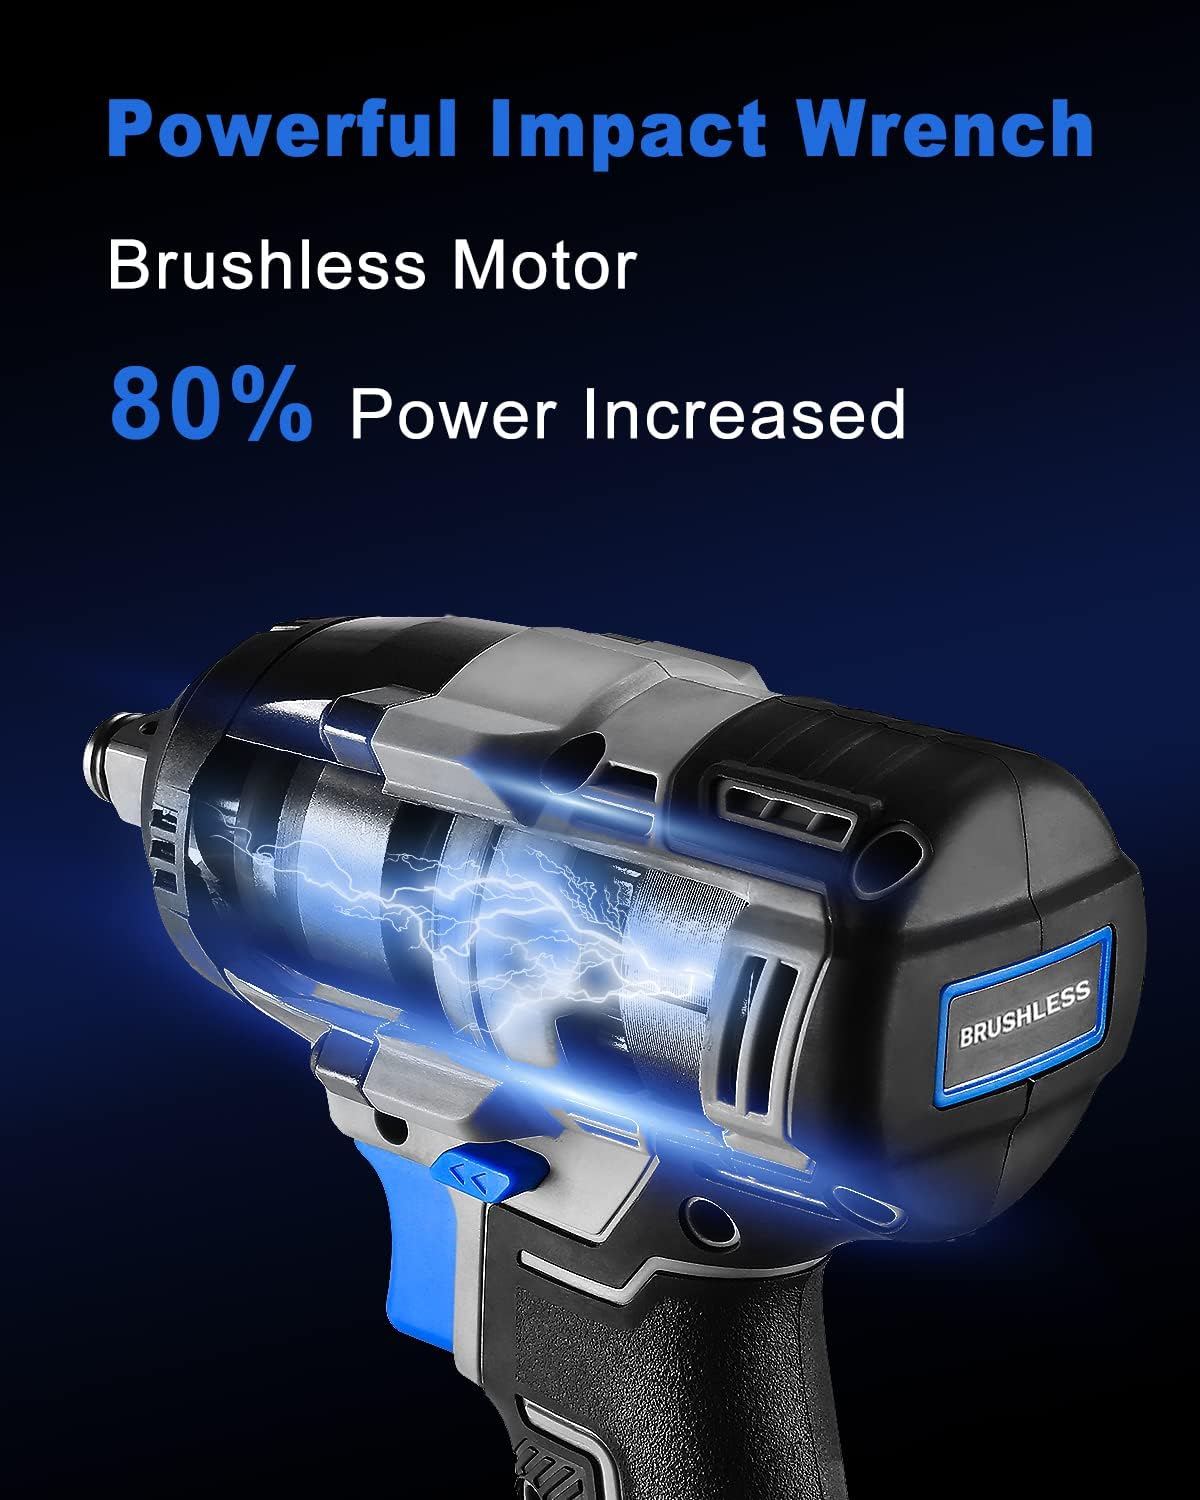 DEKOPRO Cordless Impact Wrench 1/2inch,20V Power Impact Wrench, Powerful Brushless Motor, 3-Variable Speed, Max Torque 258 ft-lbs (350N